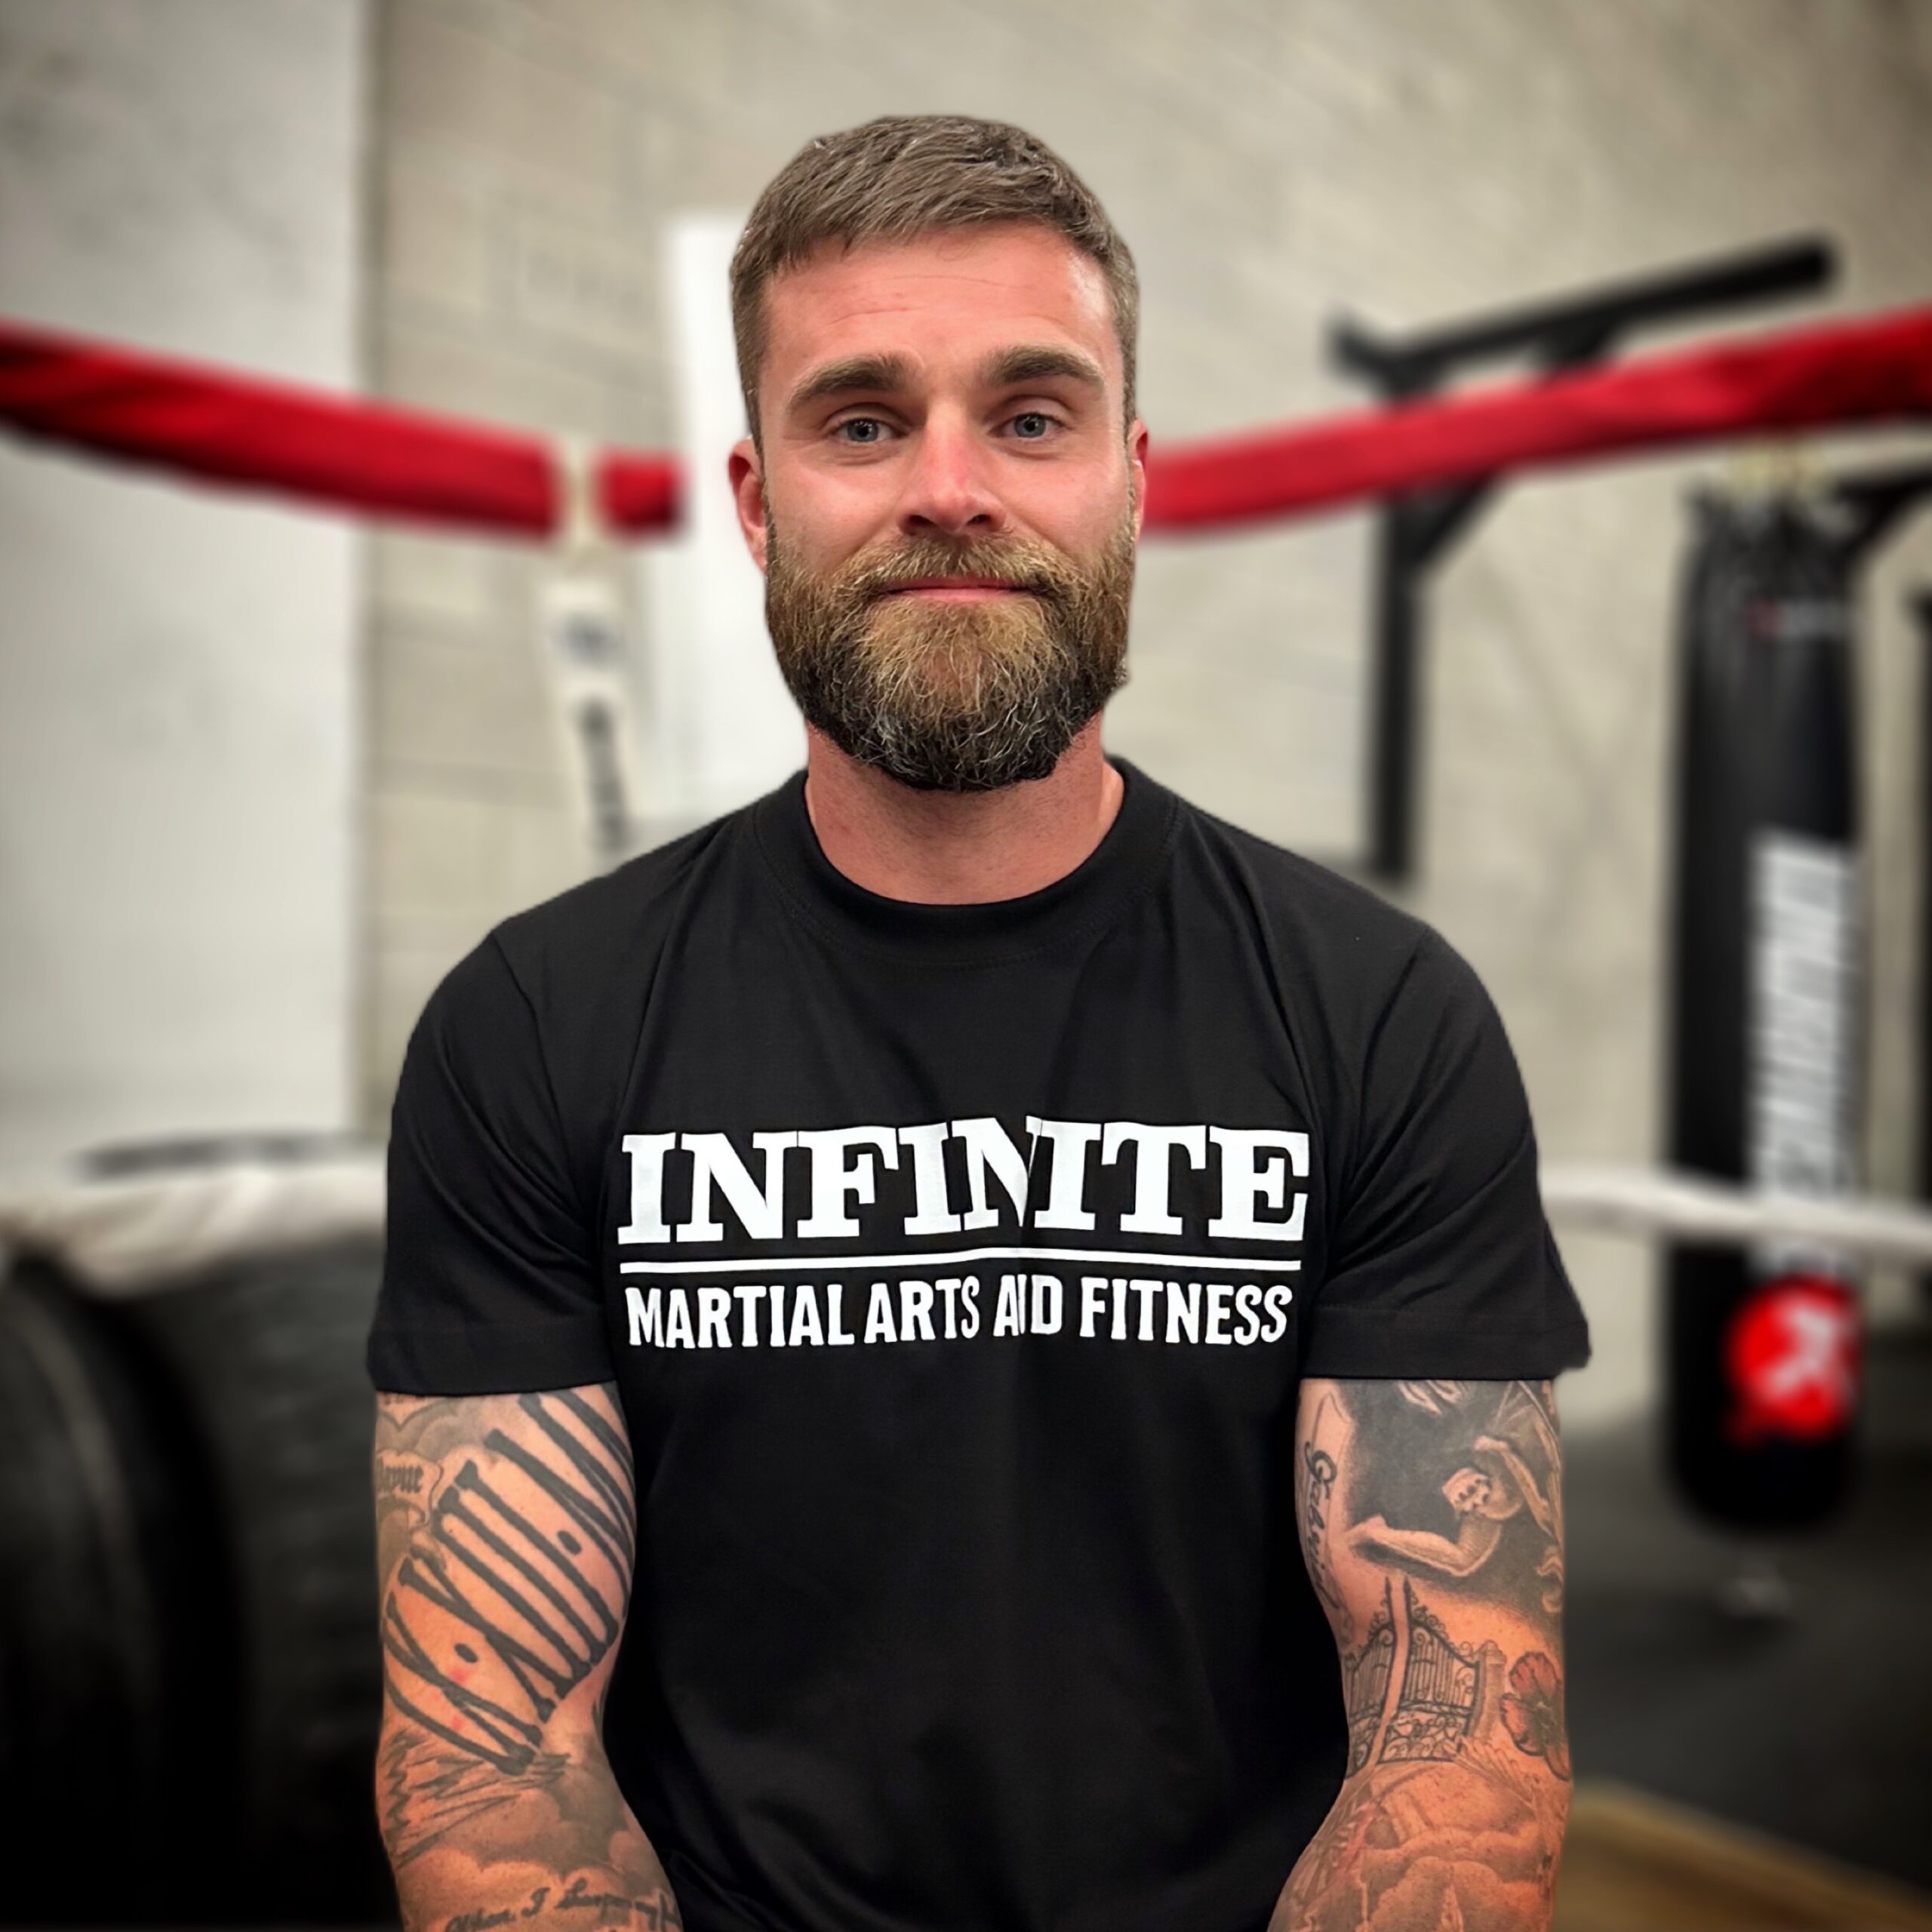 Christian Payne boxing instructor of Infinite martial arts sitting in the ring